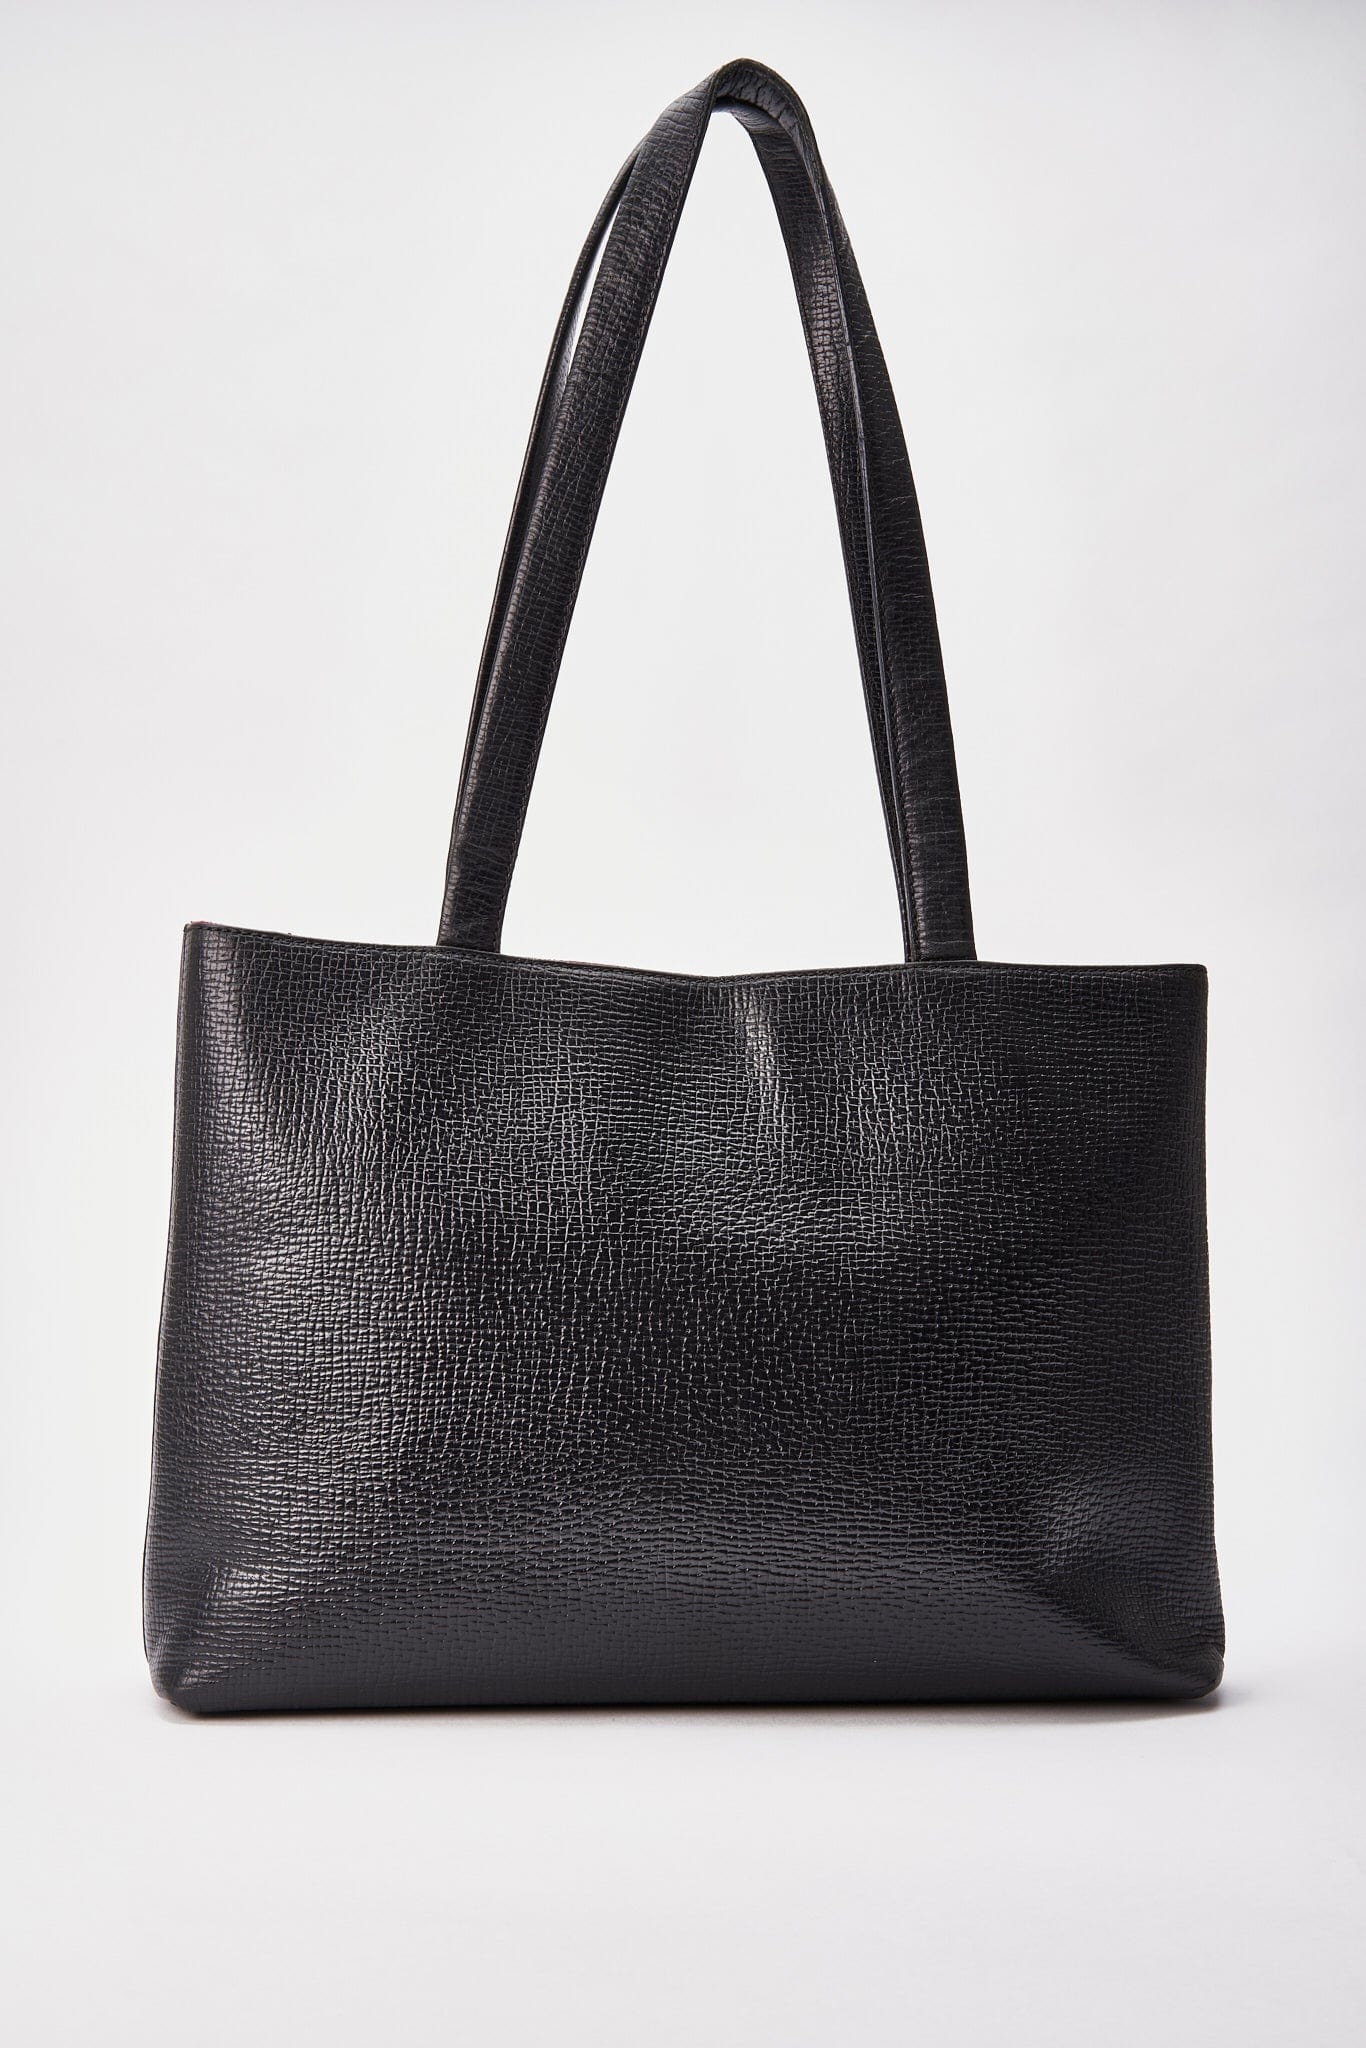 Vintage Loewe Black Textured Leather Tote Bag With Pouch